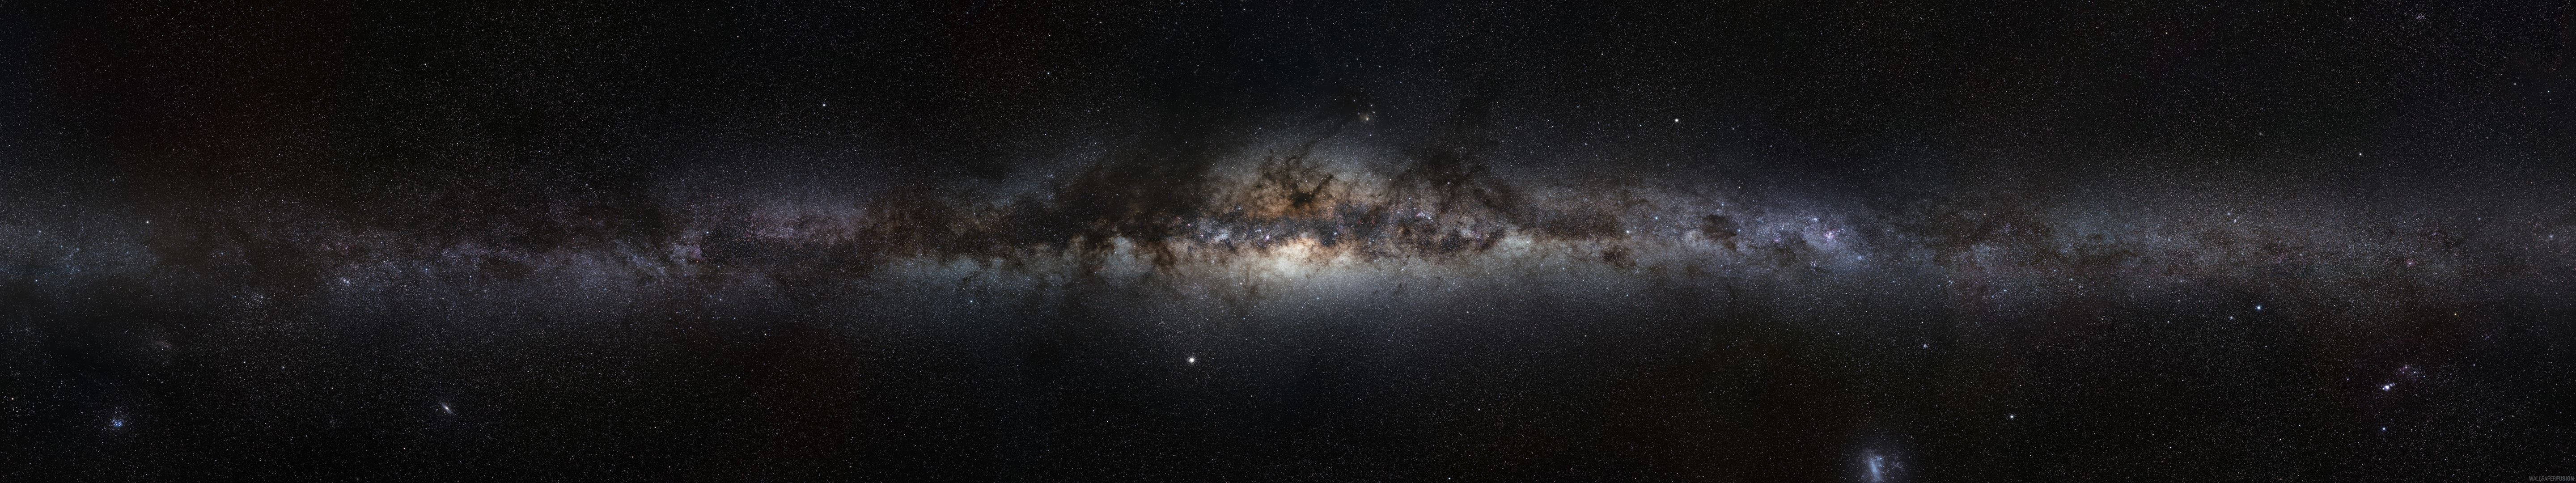 Witness the Beauty of the Milky Way Wallpaper